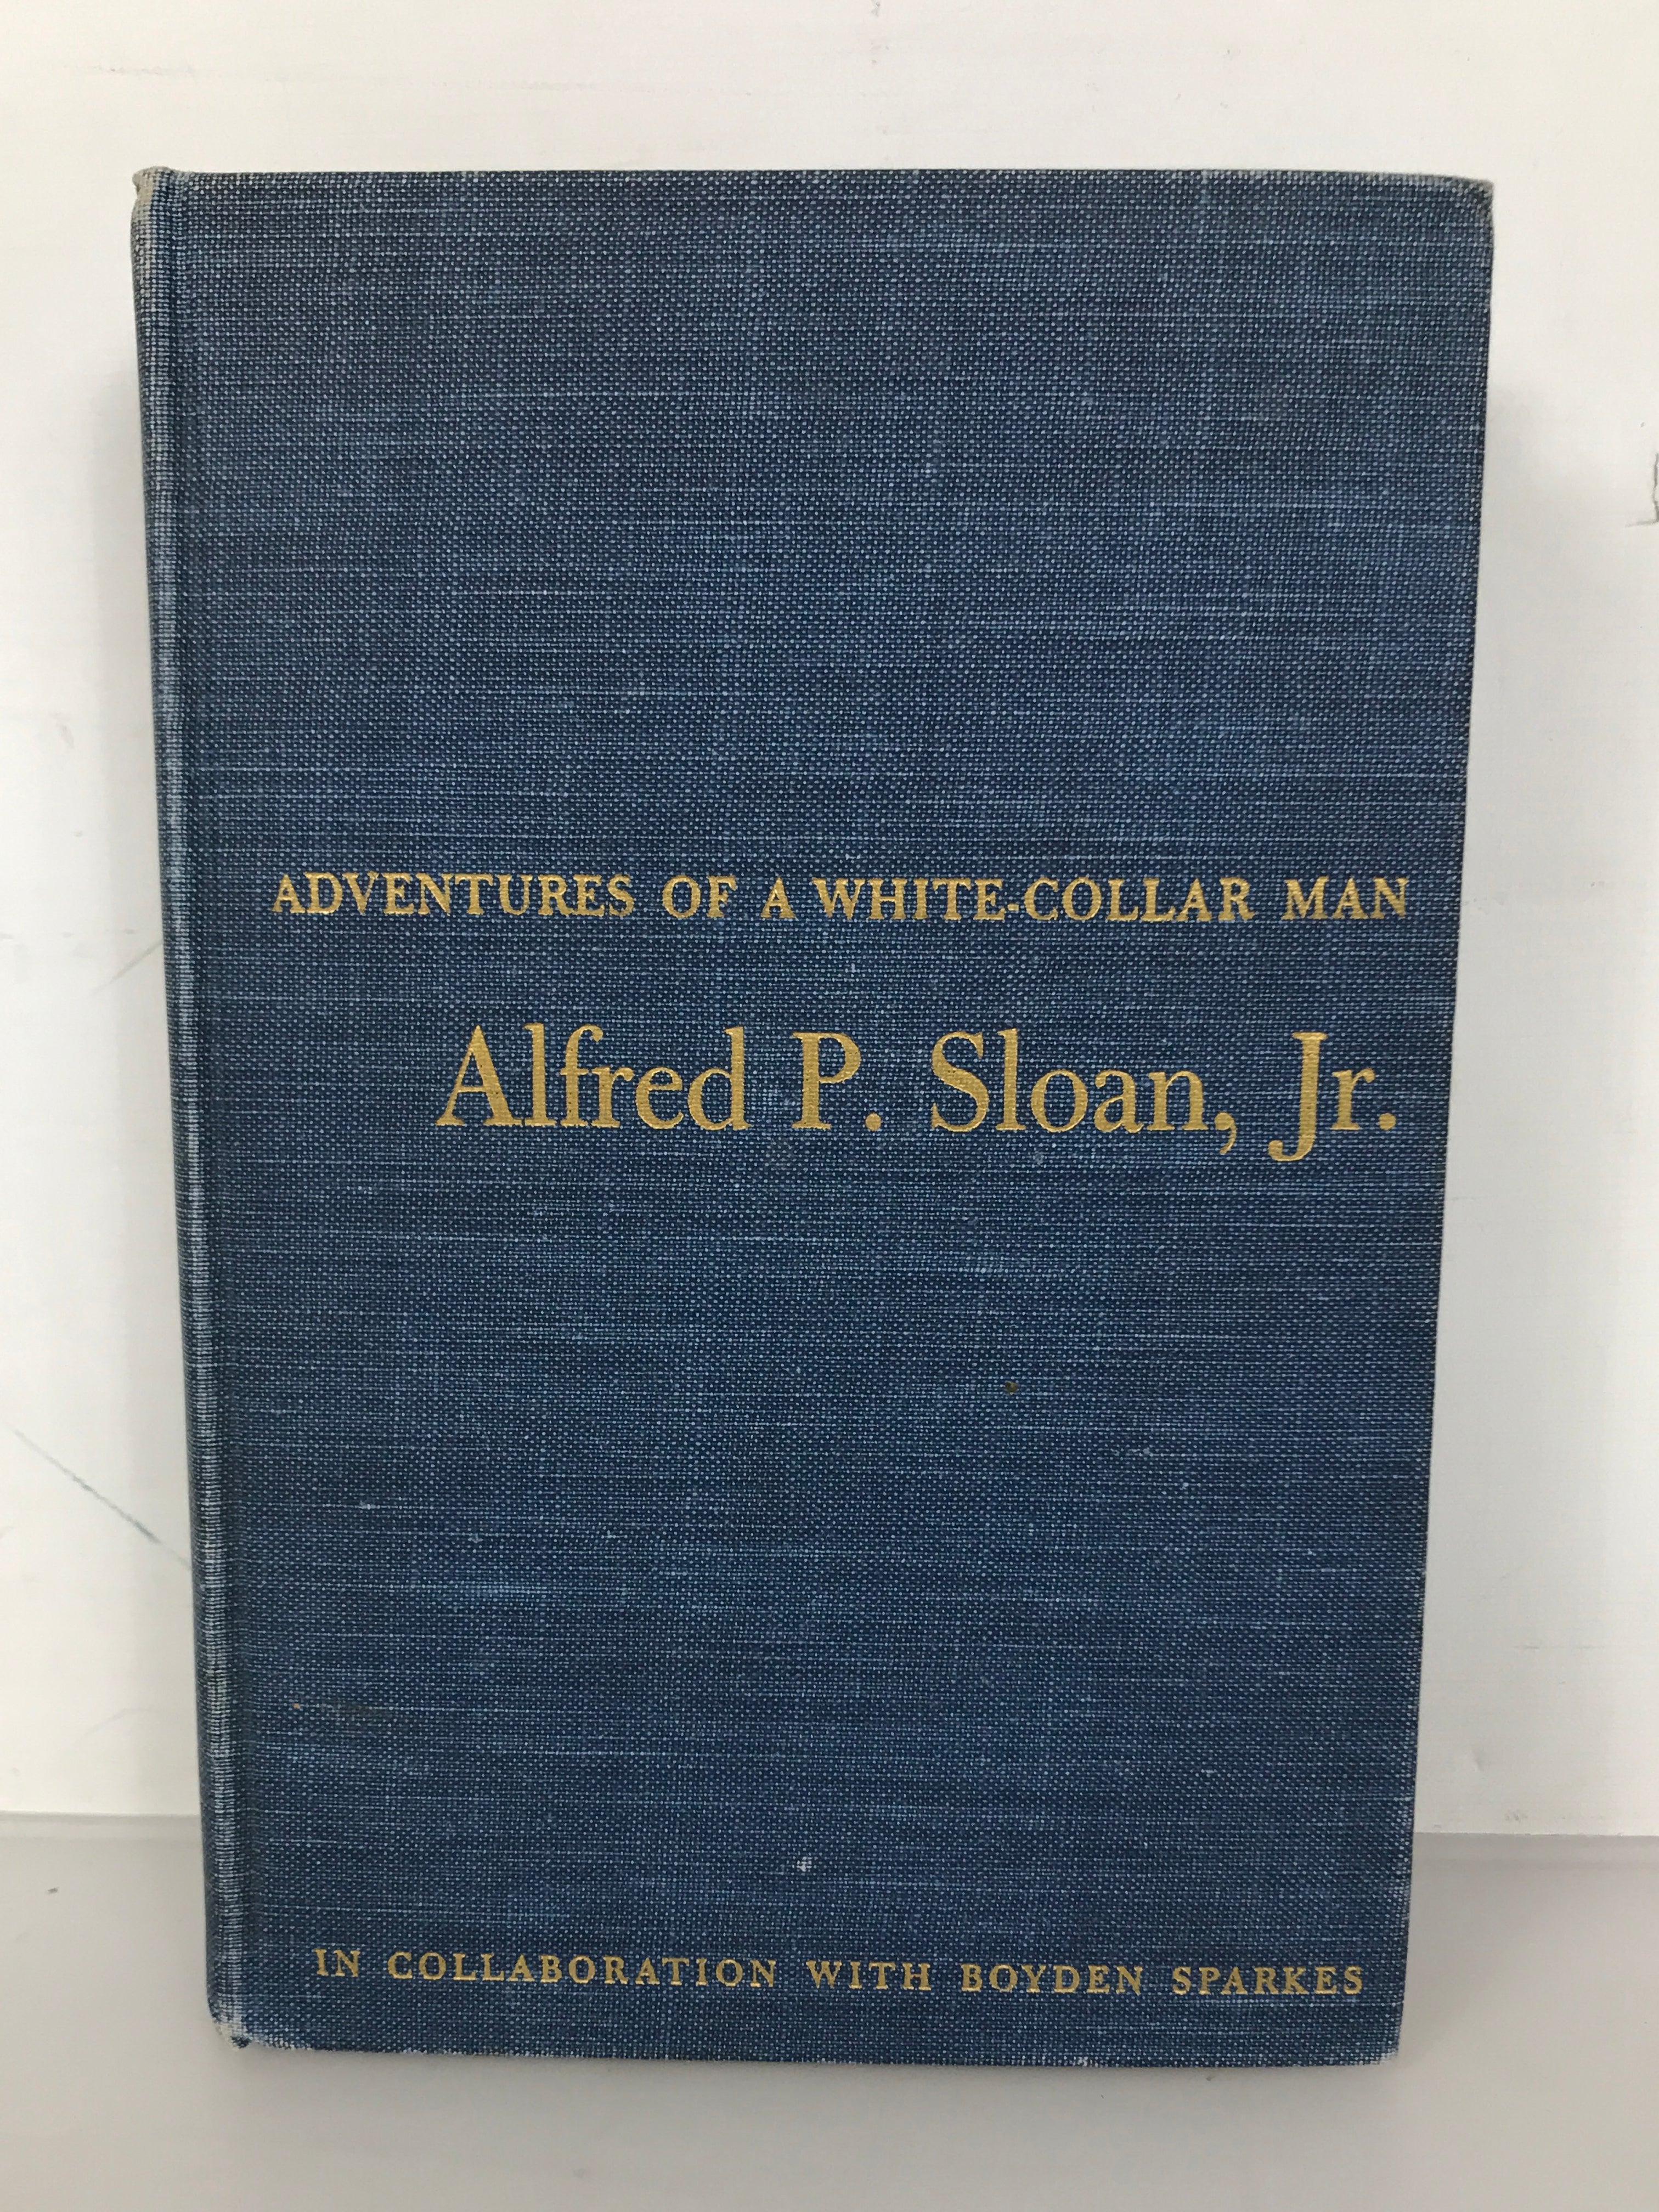 Adventures of a White Collar Man by Alfred P. Sloan, Jr. (1941) Vintage First Edition HC